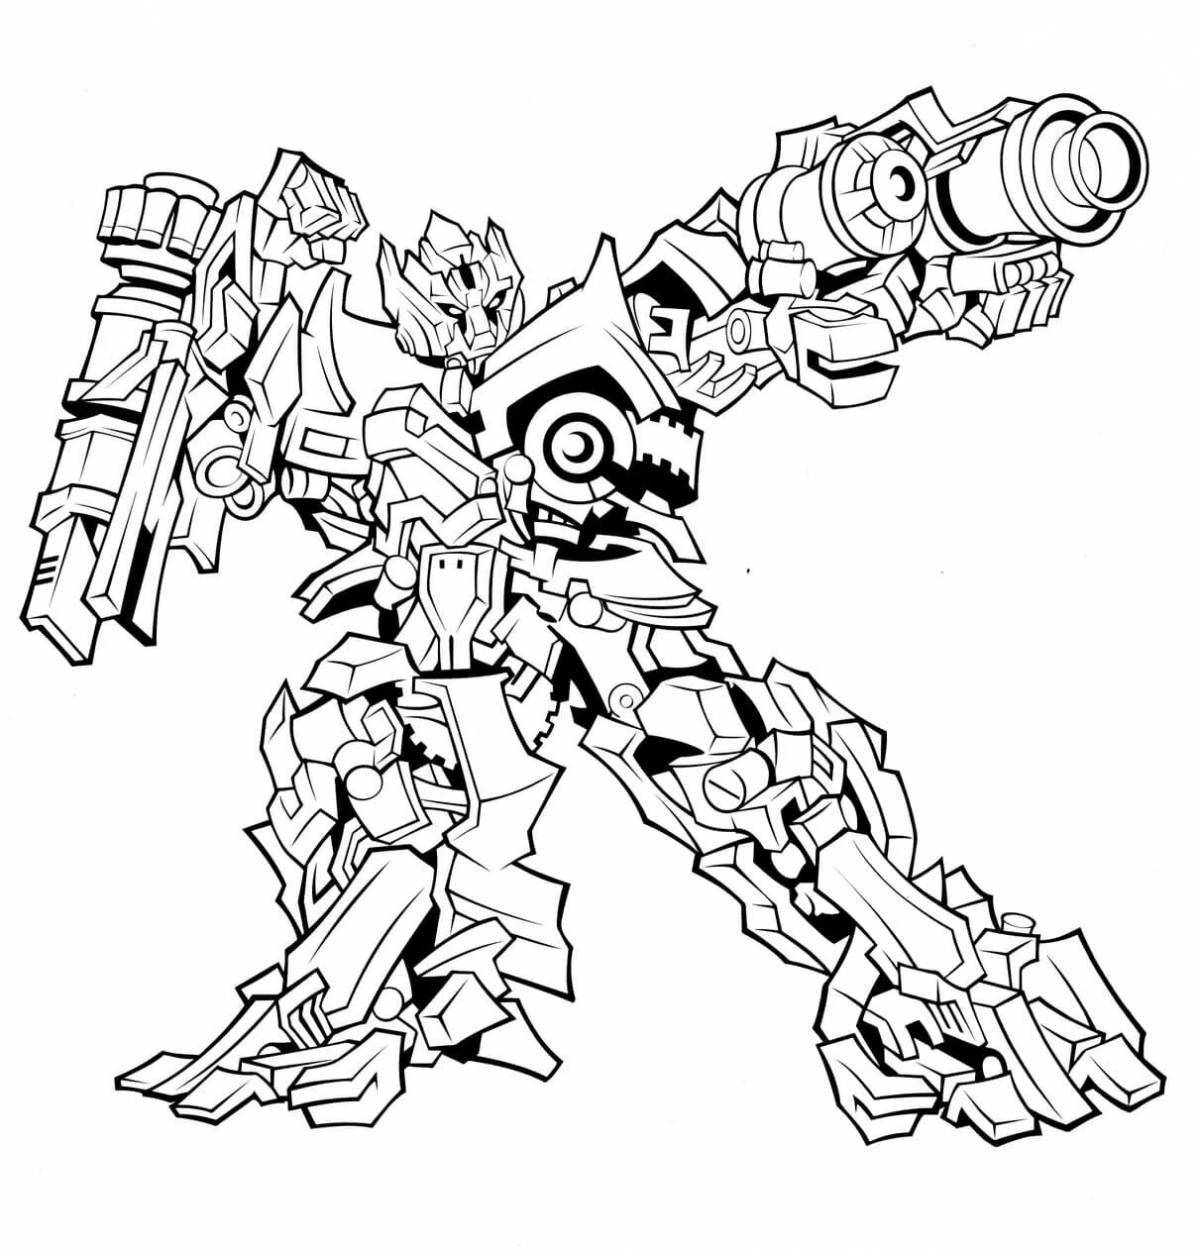 Cheerful Transformer Robot Coloring Pages for Boys